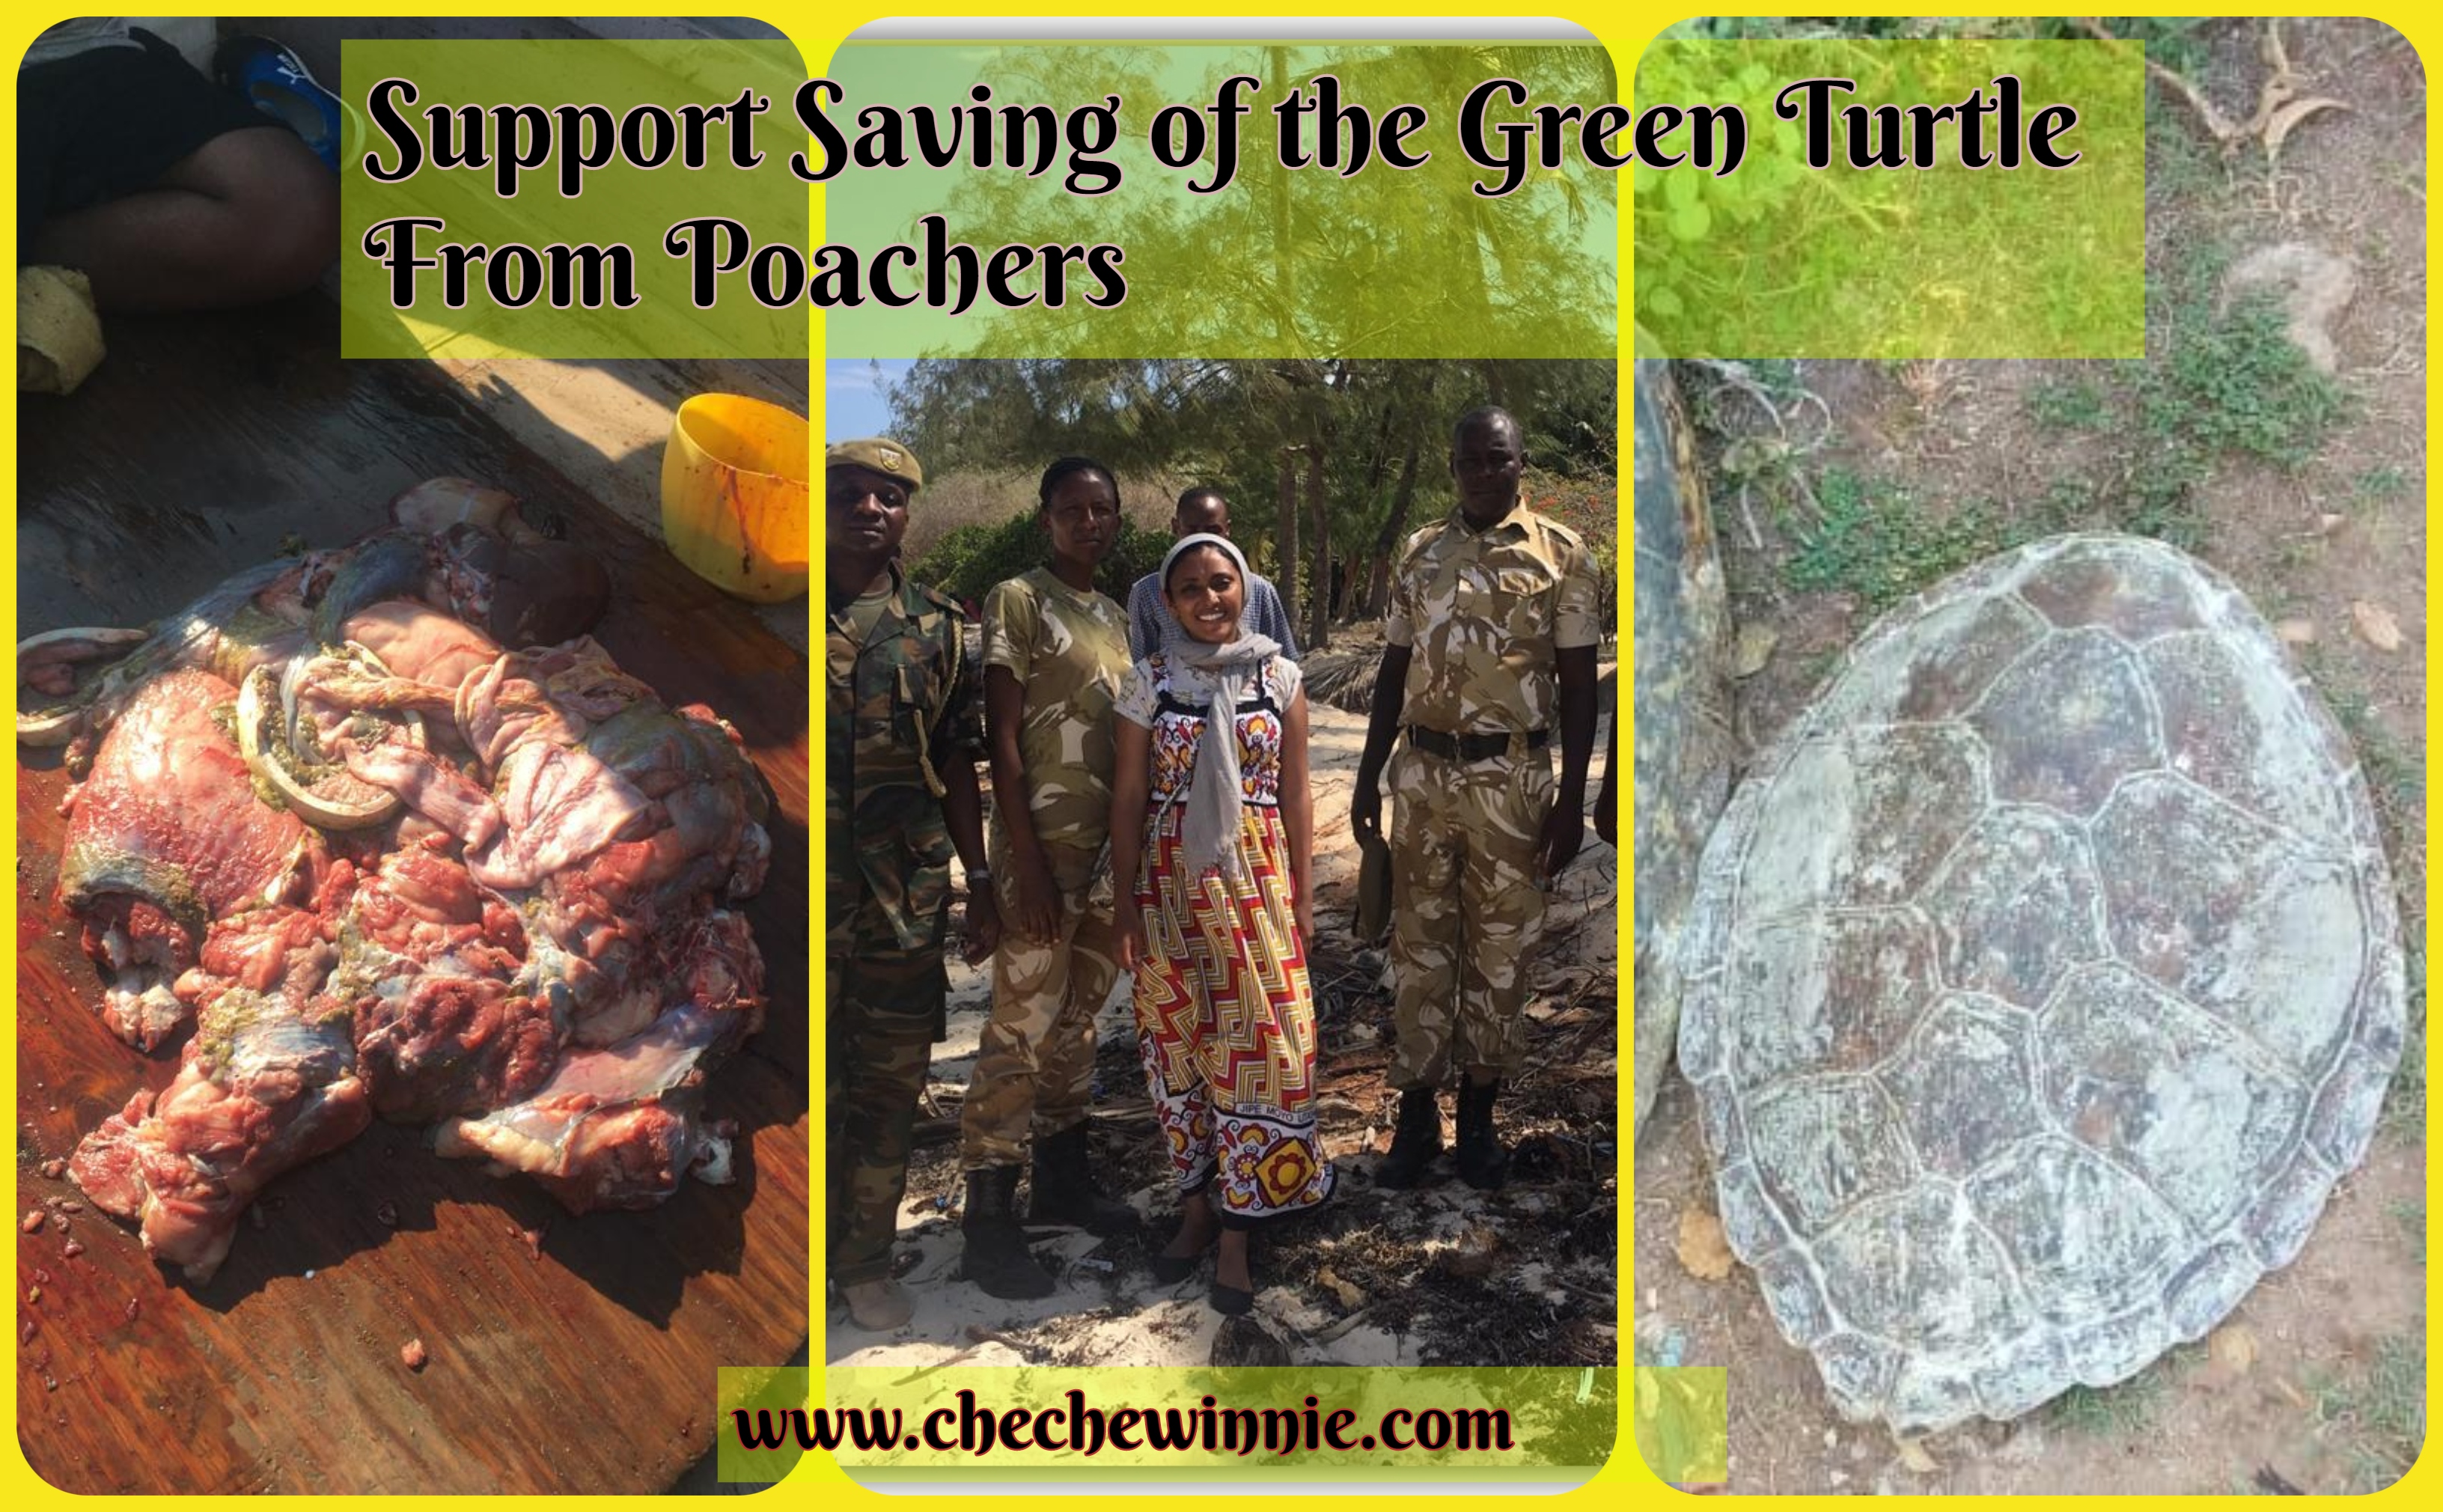 Support Saving of the Green Turtle From Poachers